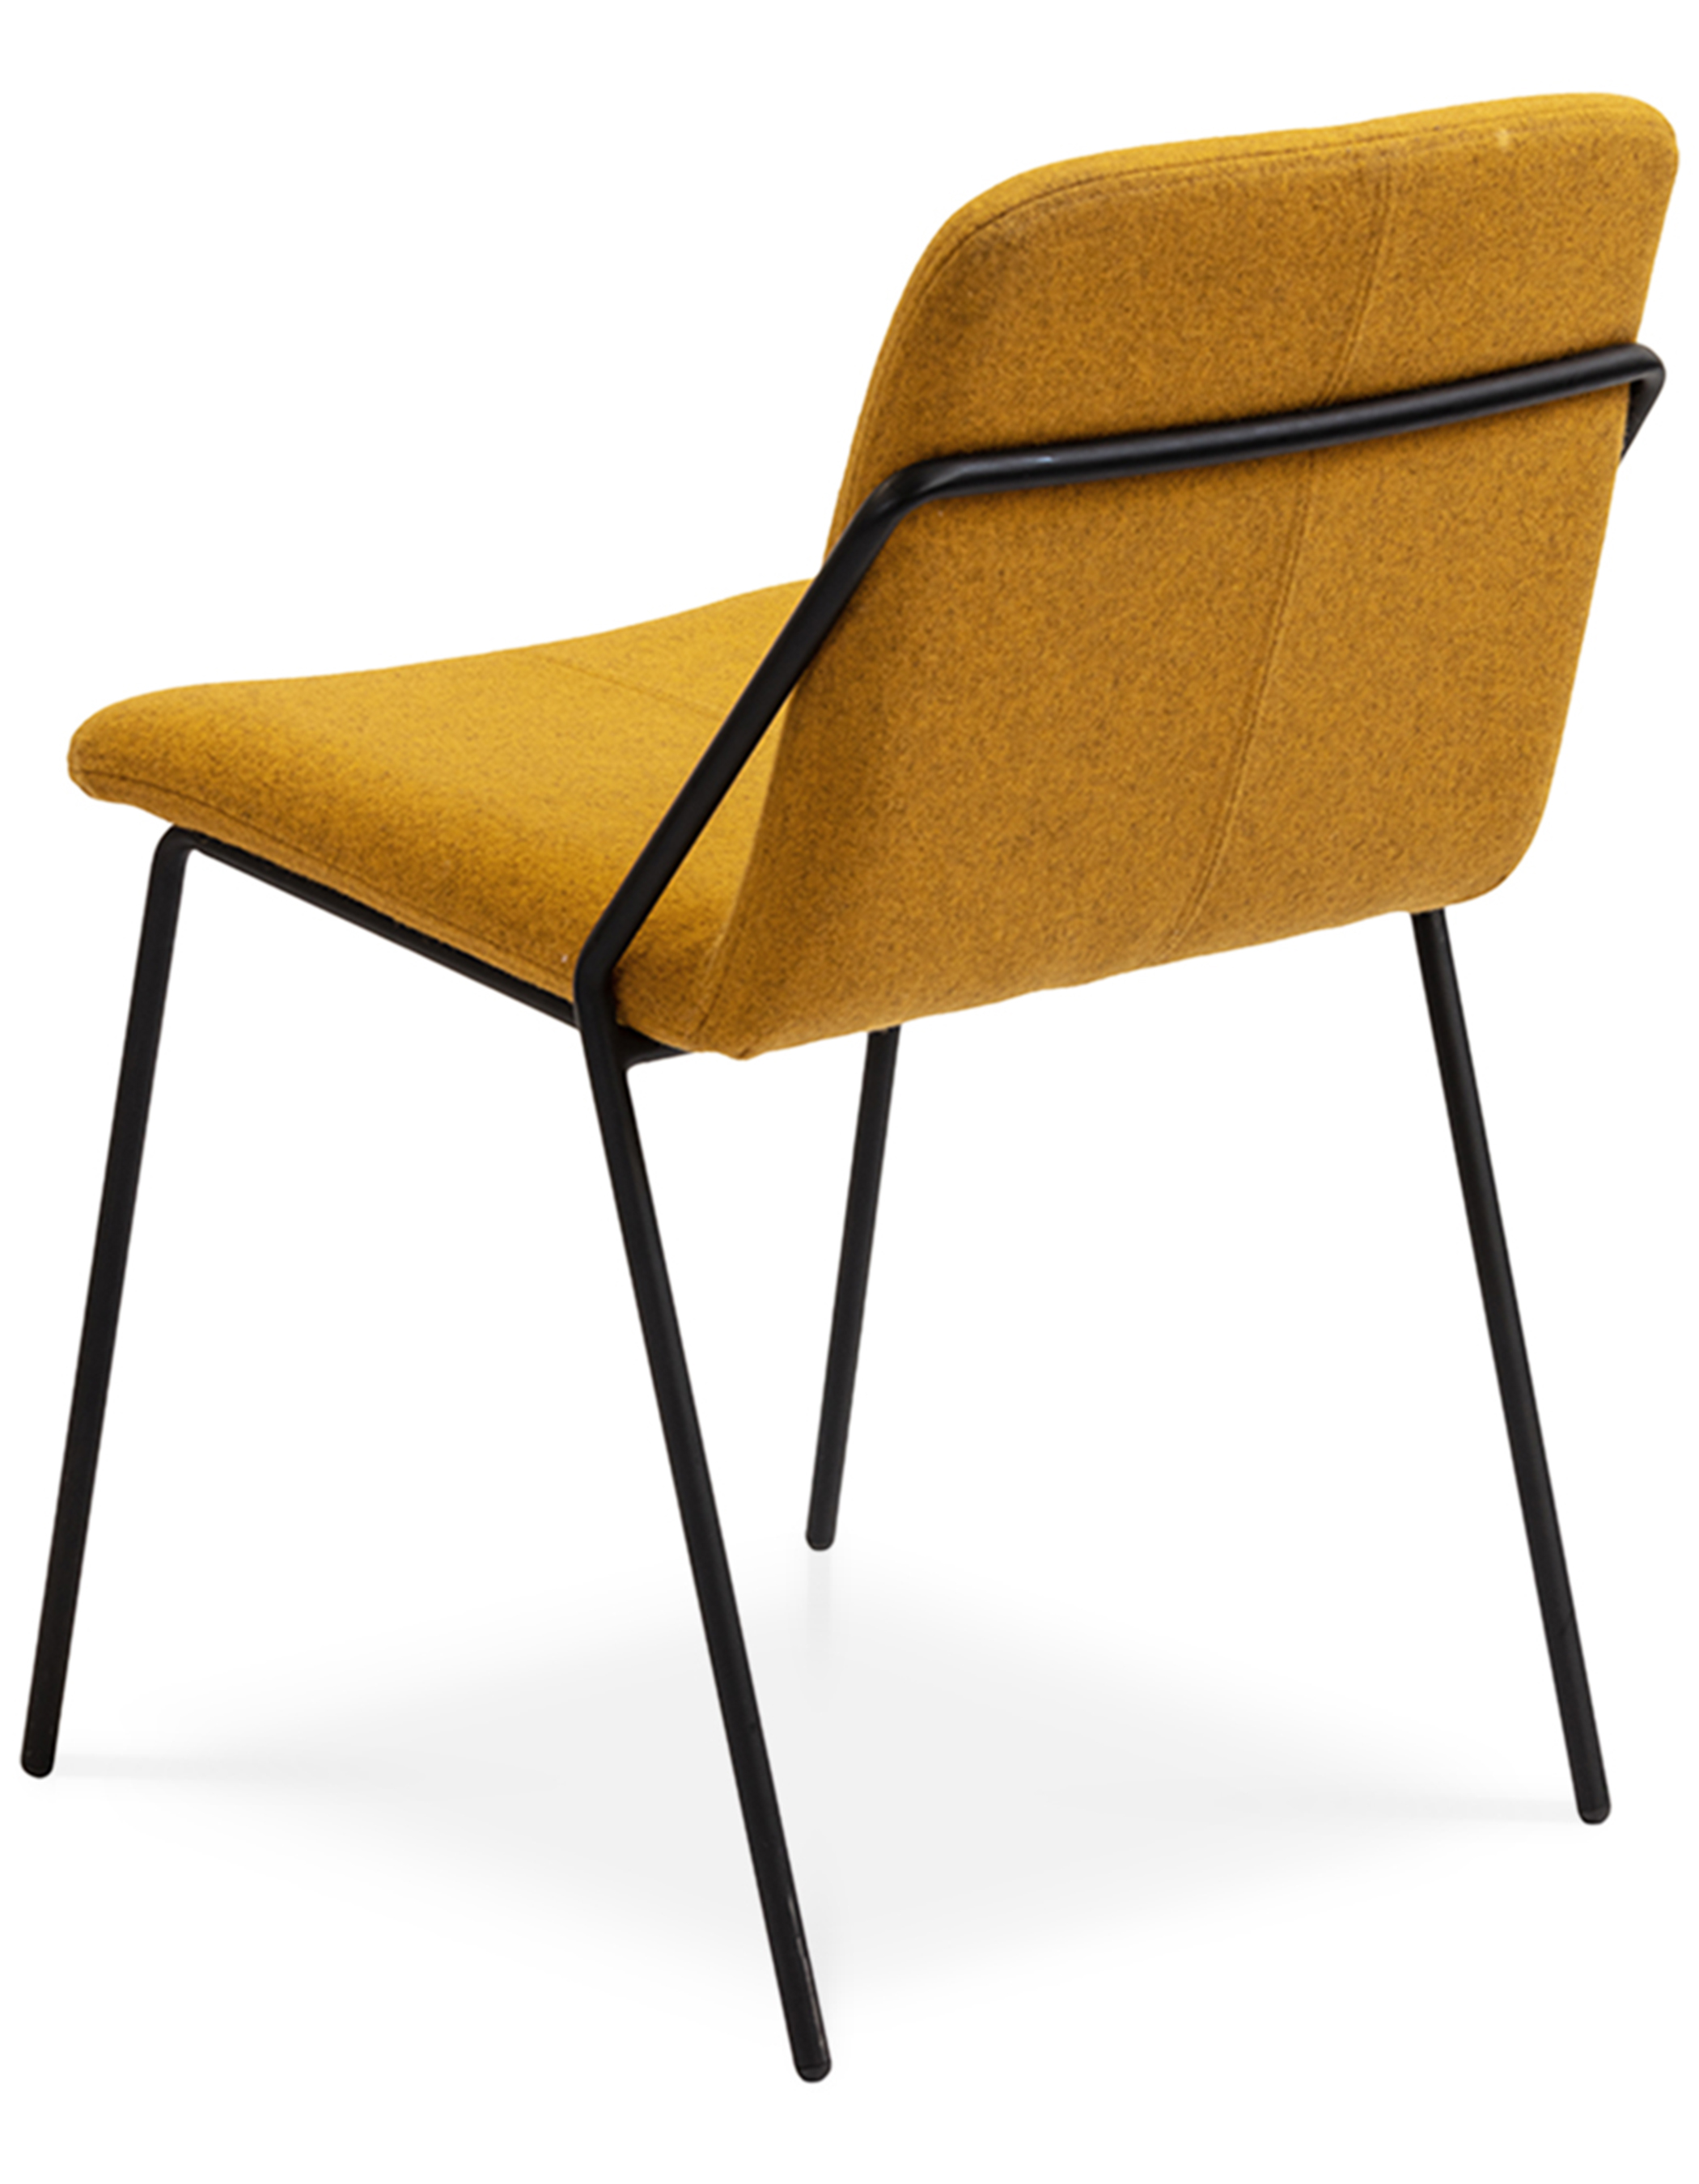 WS - Sling side chair - Upholstered yellow (Back angle)